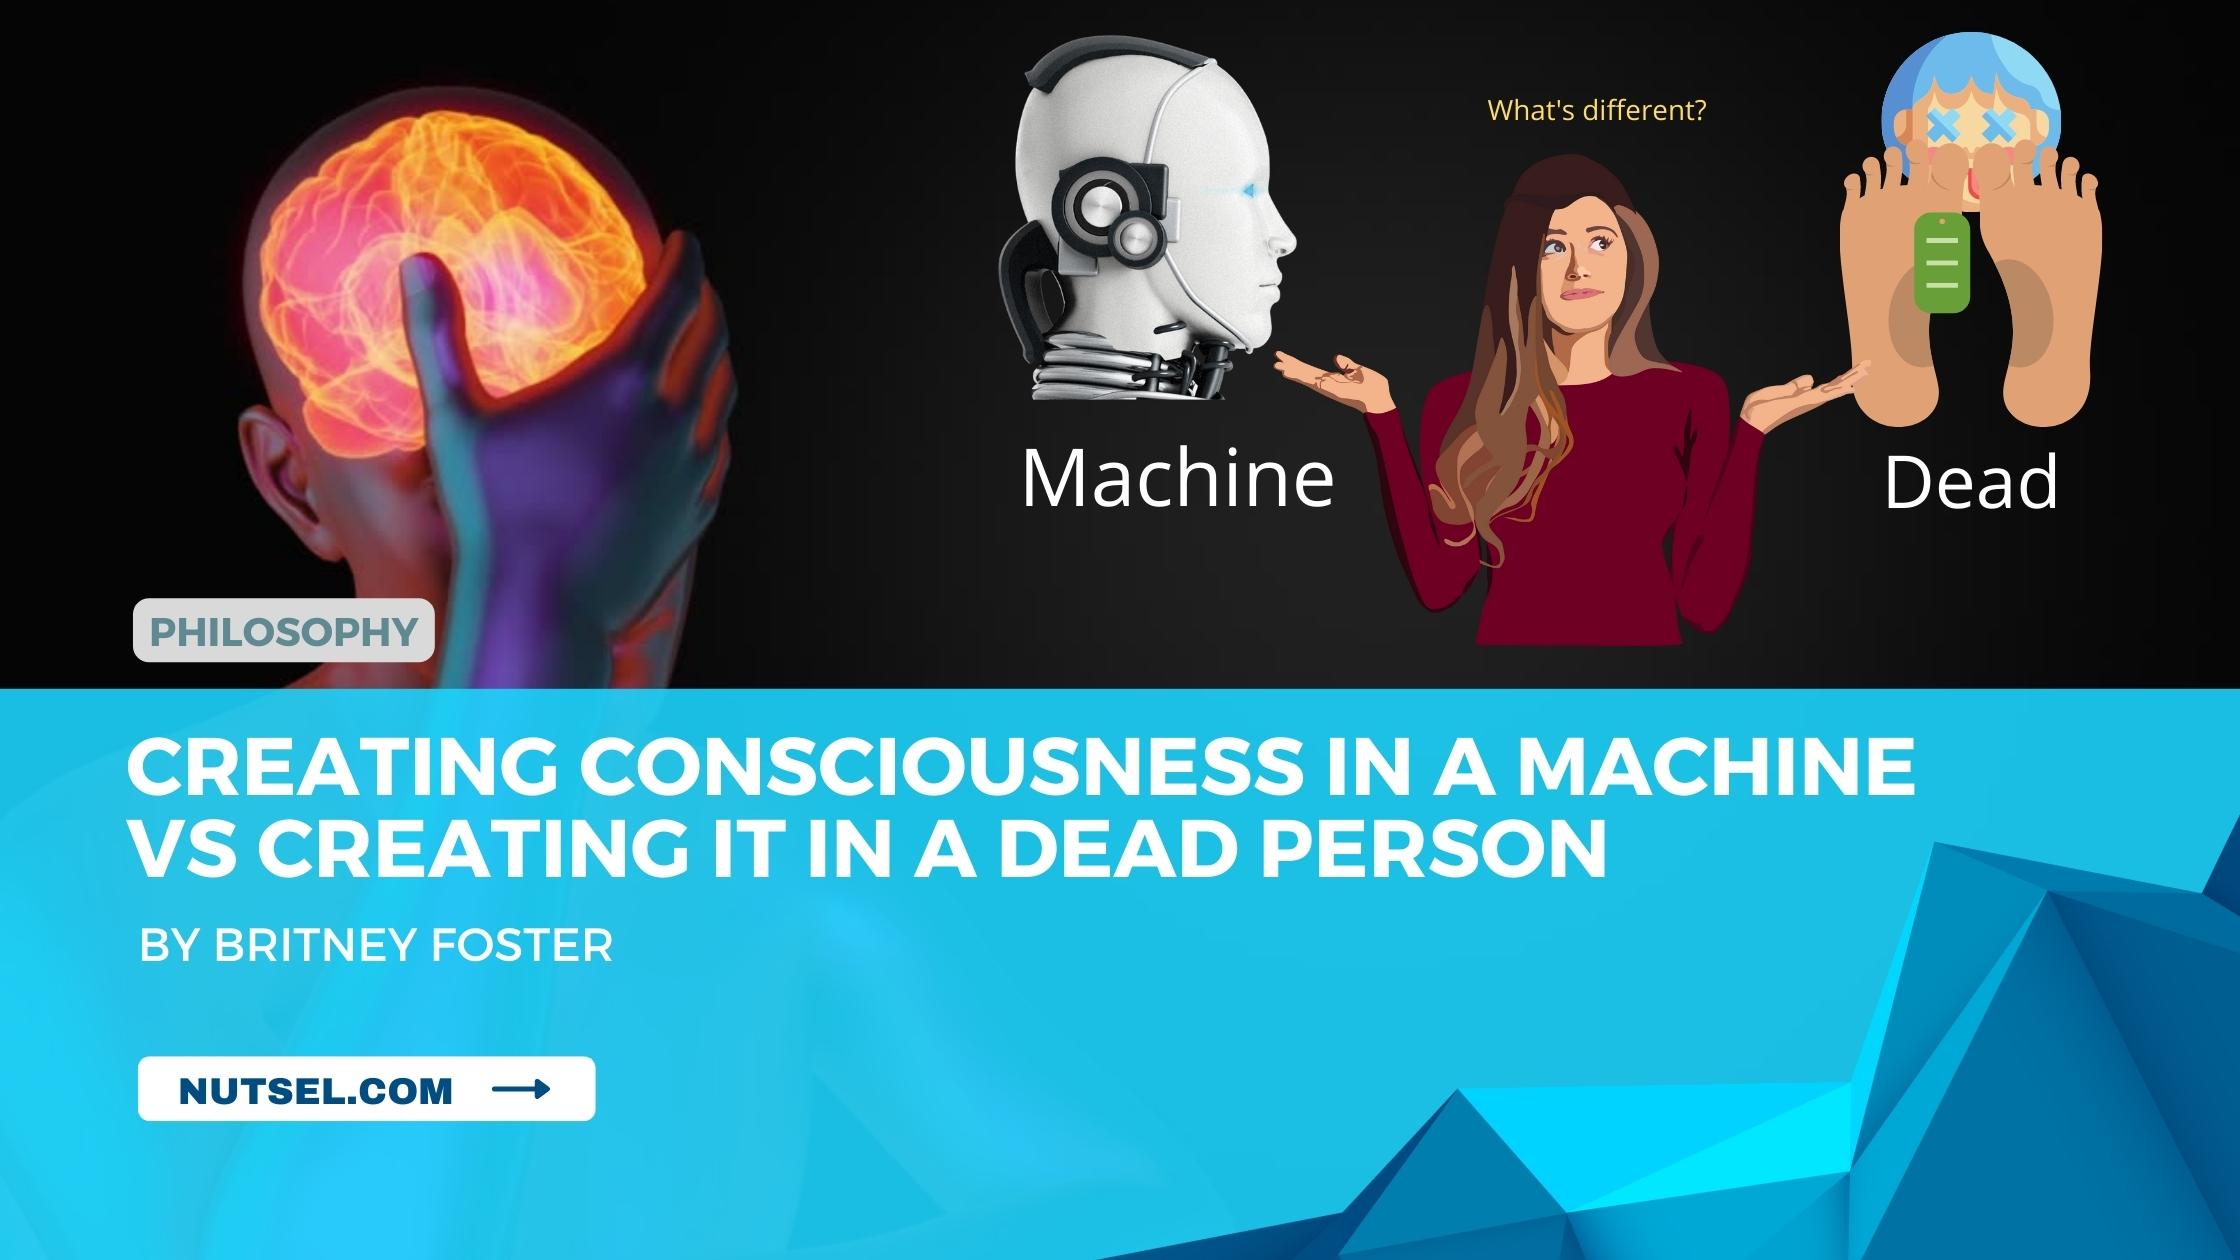 Creating consciousness in a machine vs creating it in a dead person